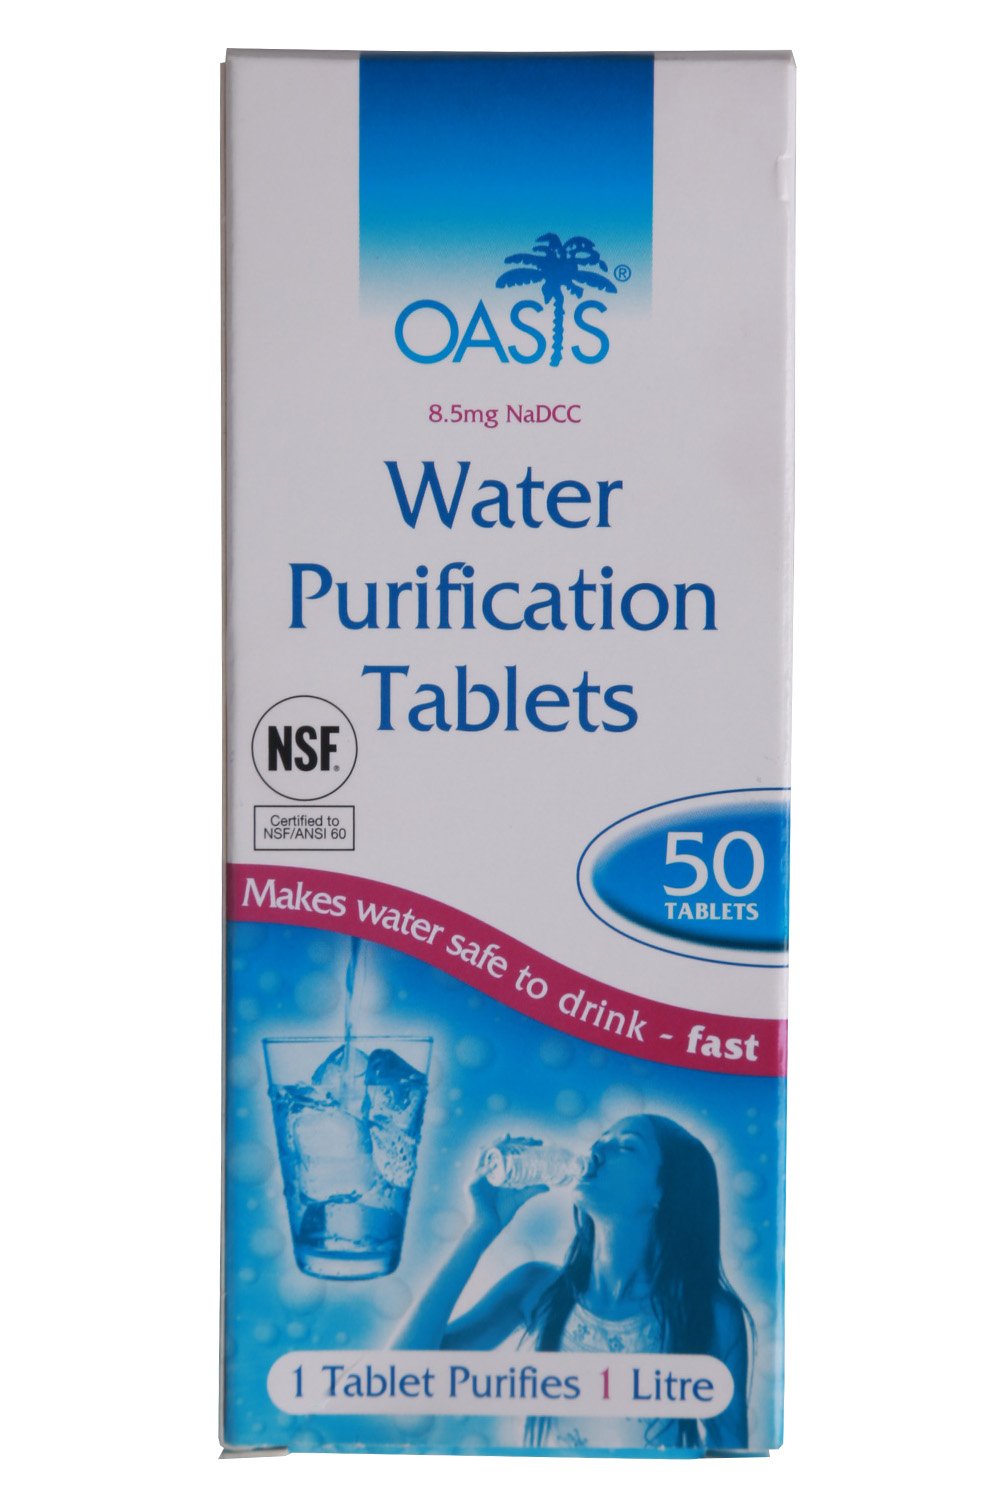 Oasis Water Purification Tablets 50 pk